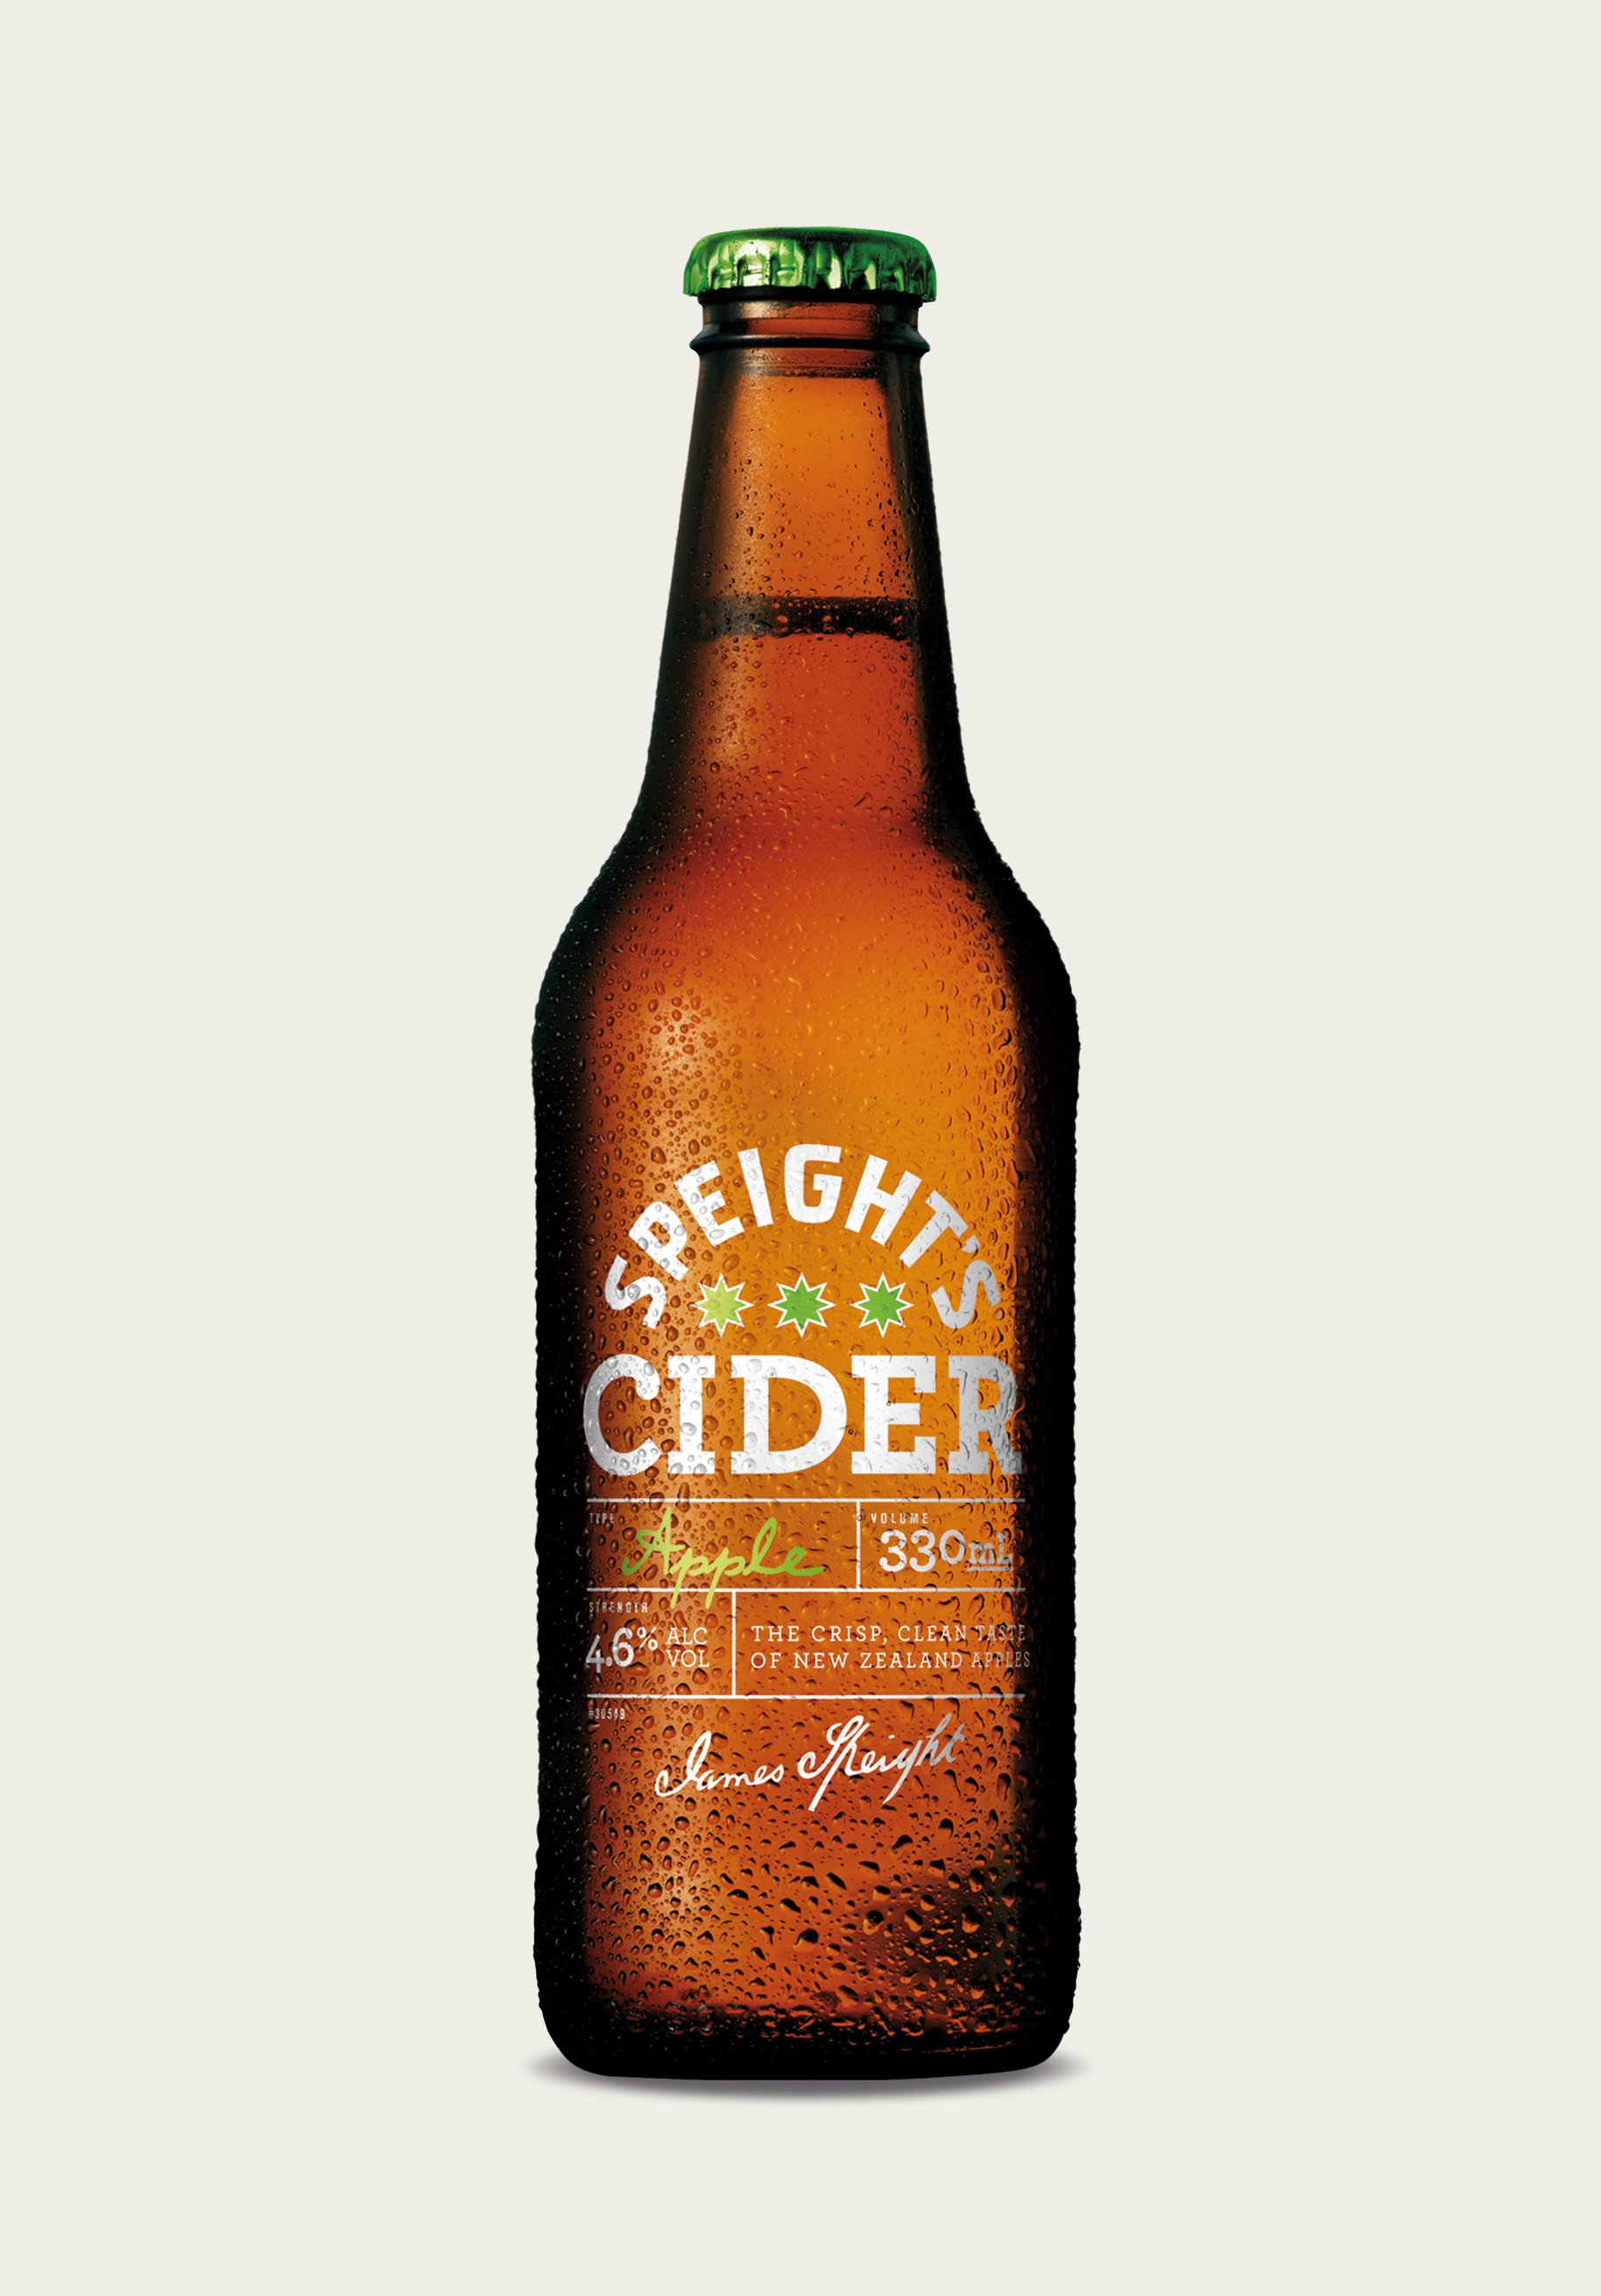 Speight's Cider packaging